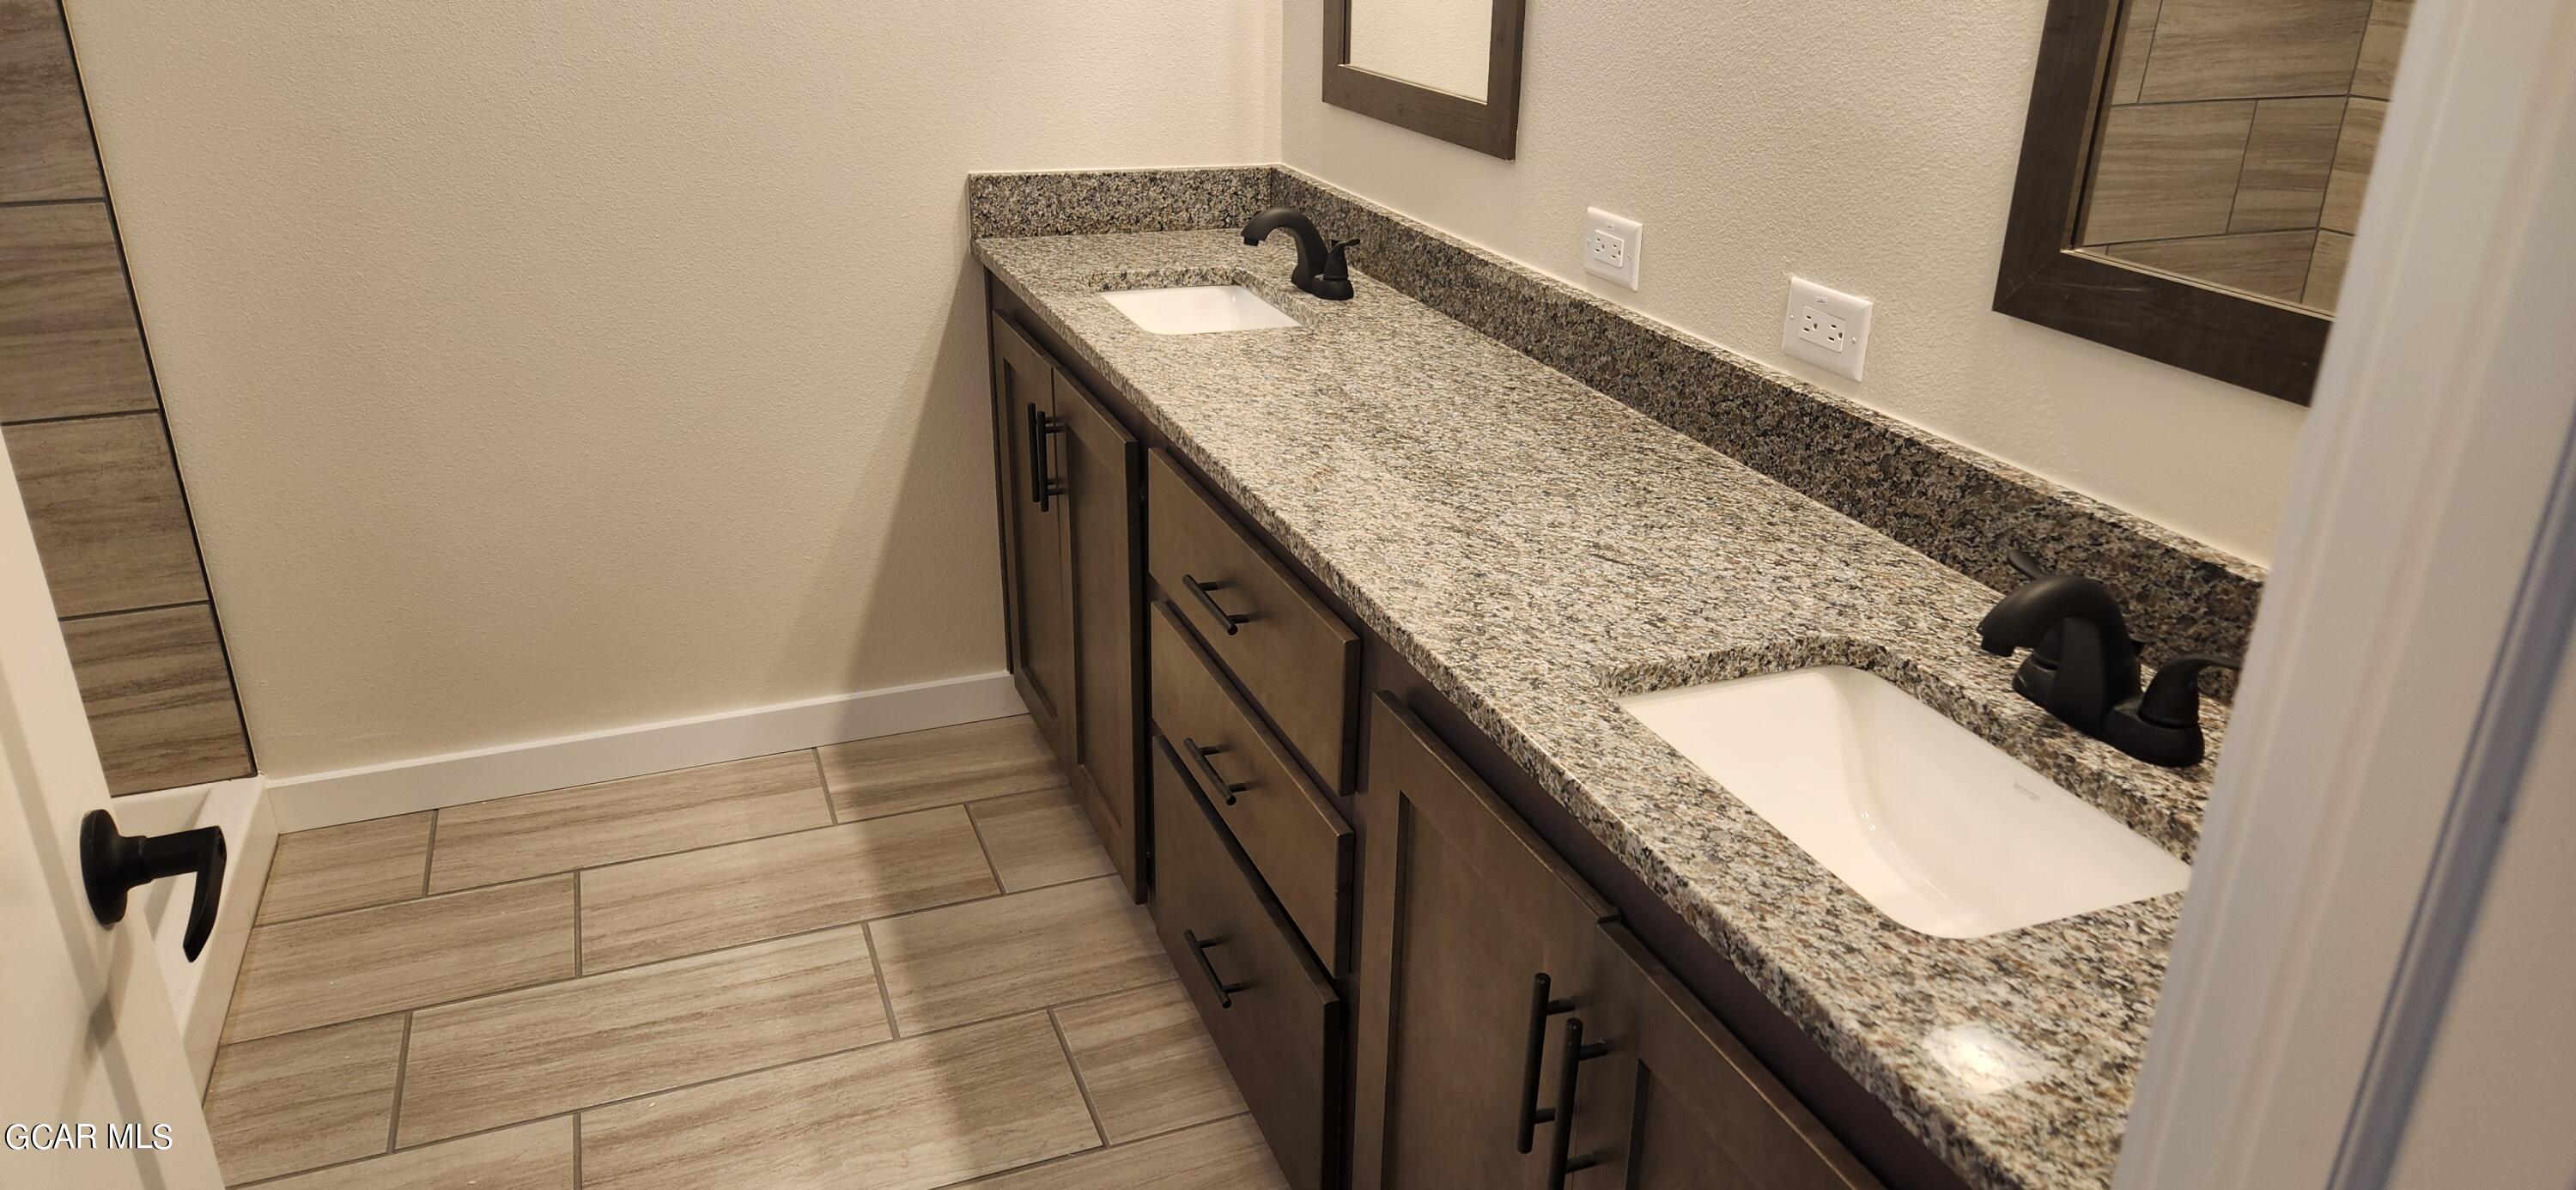 a bathroom with a granite countertop sink and washing machine